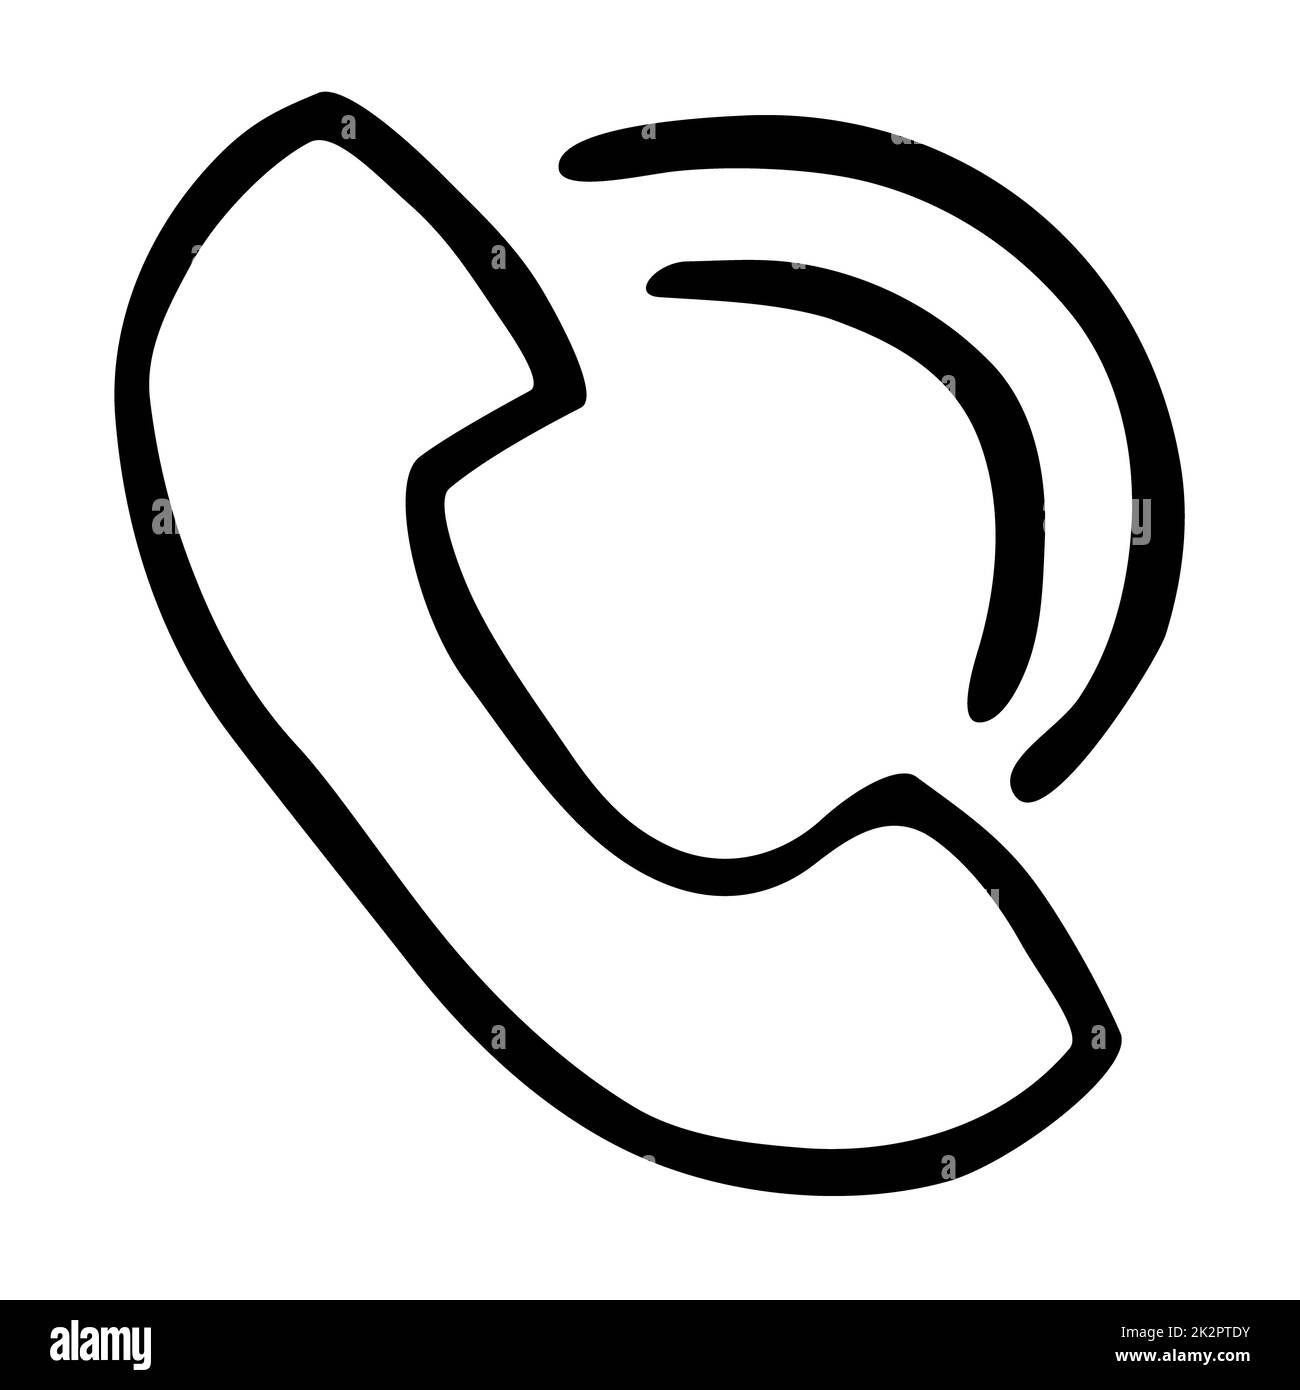 Doodle telephone call icon, hand drawn with thin black line. Stock Photo